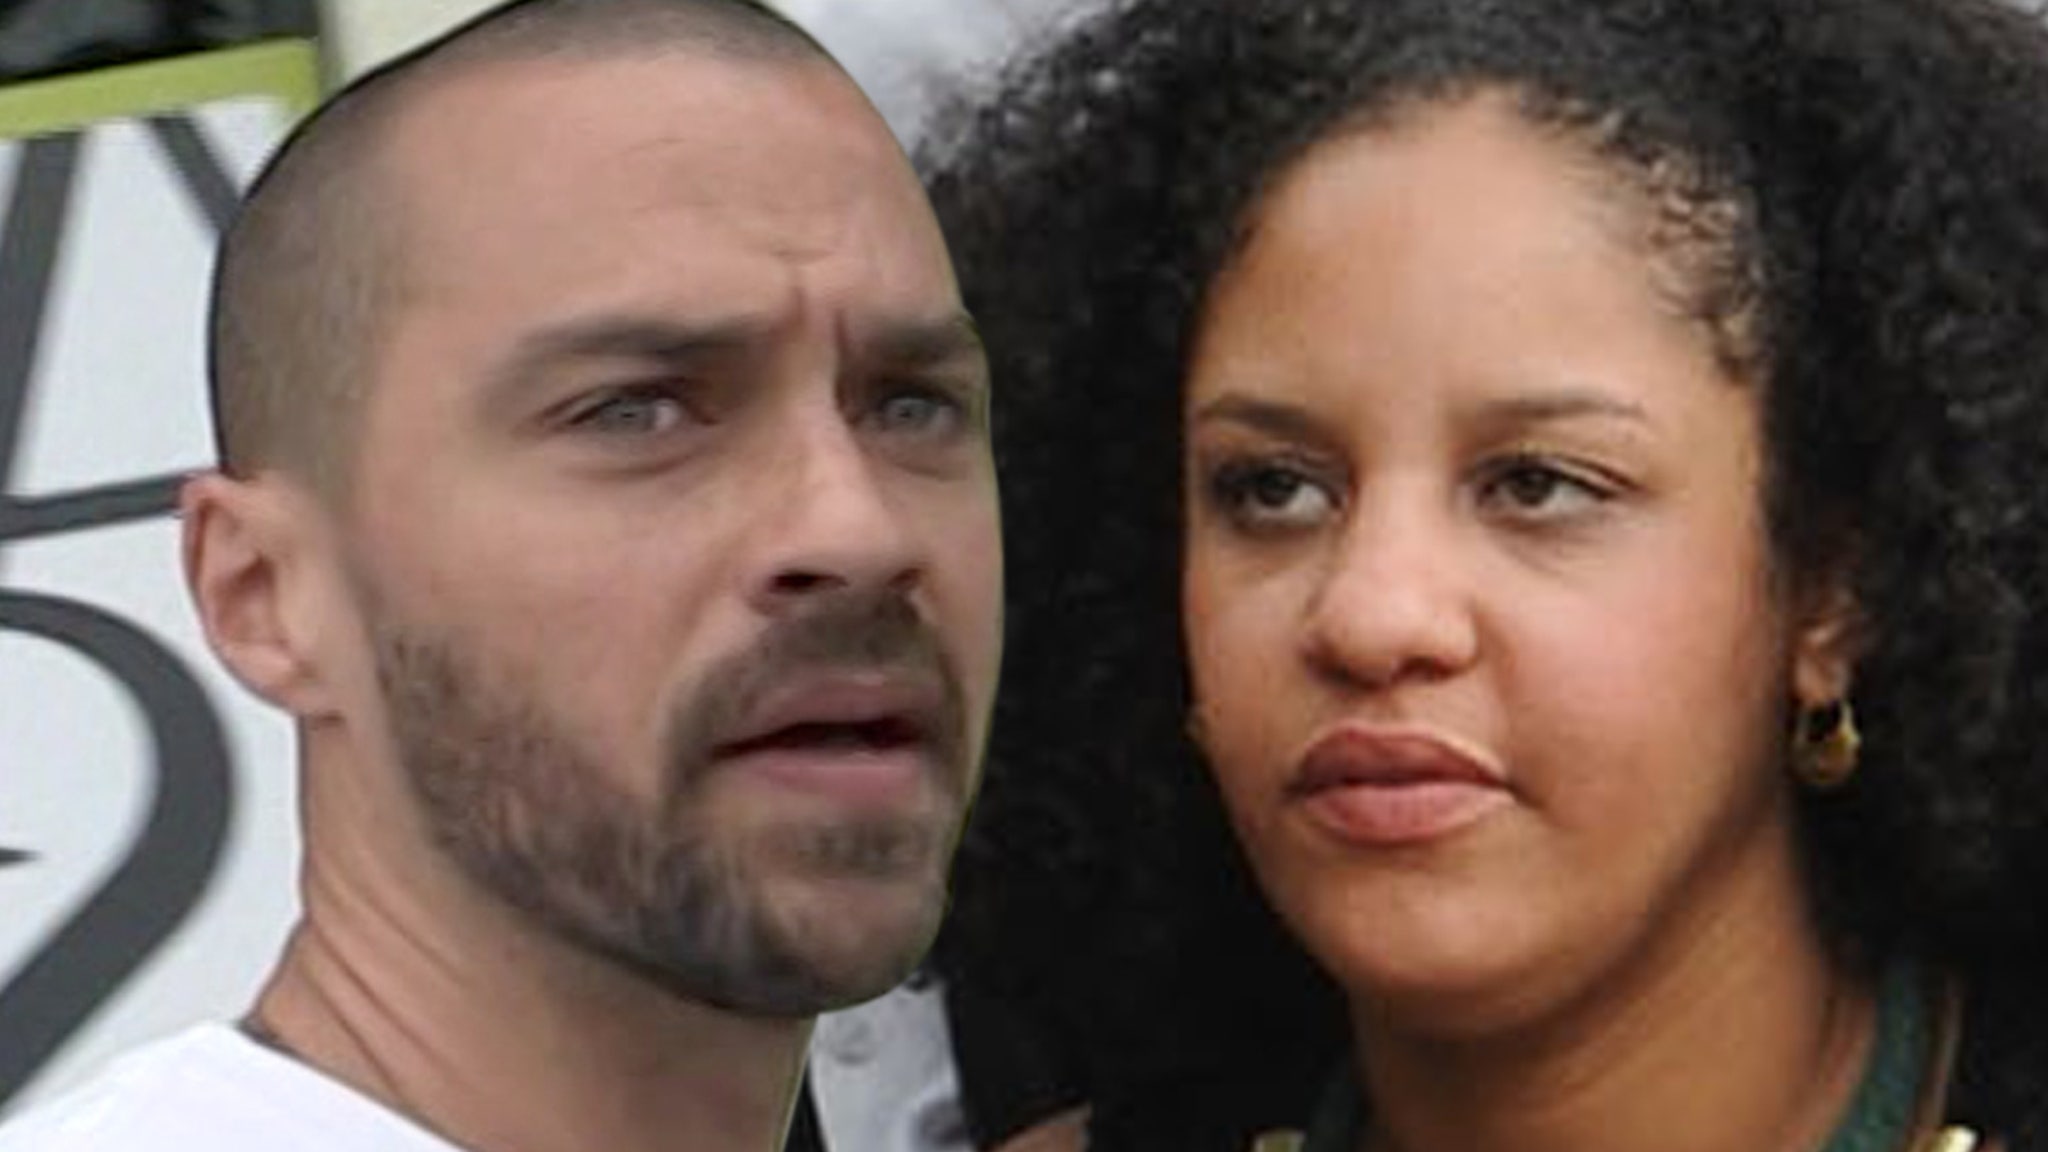 Jesse Williams' Child Support Payments Drastically Reduced Following 'GA' Exit